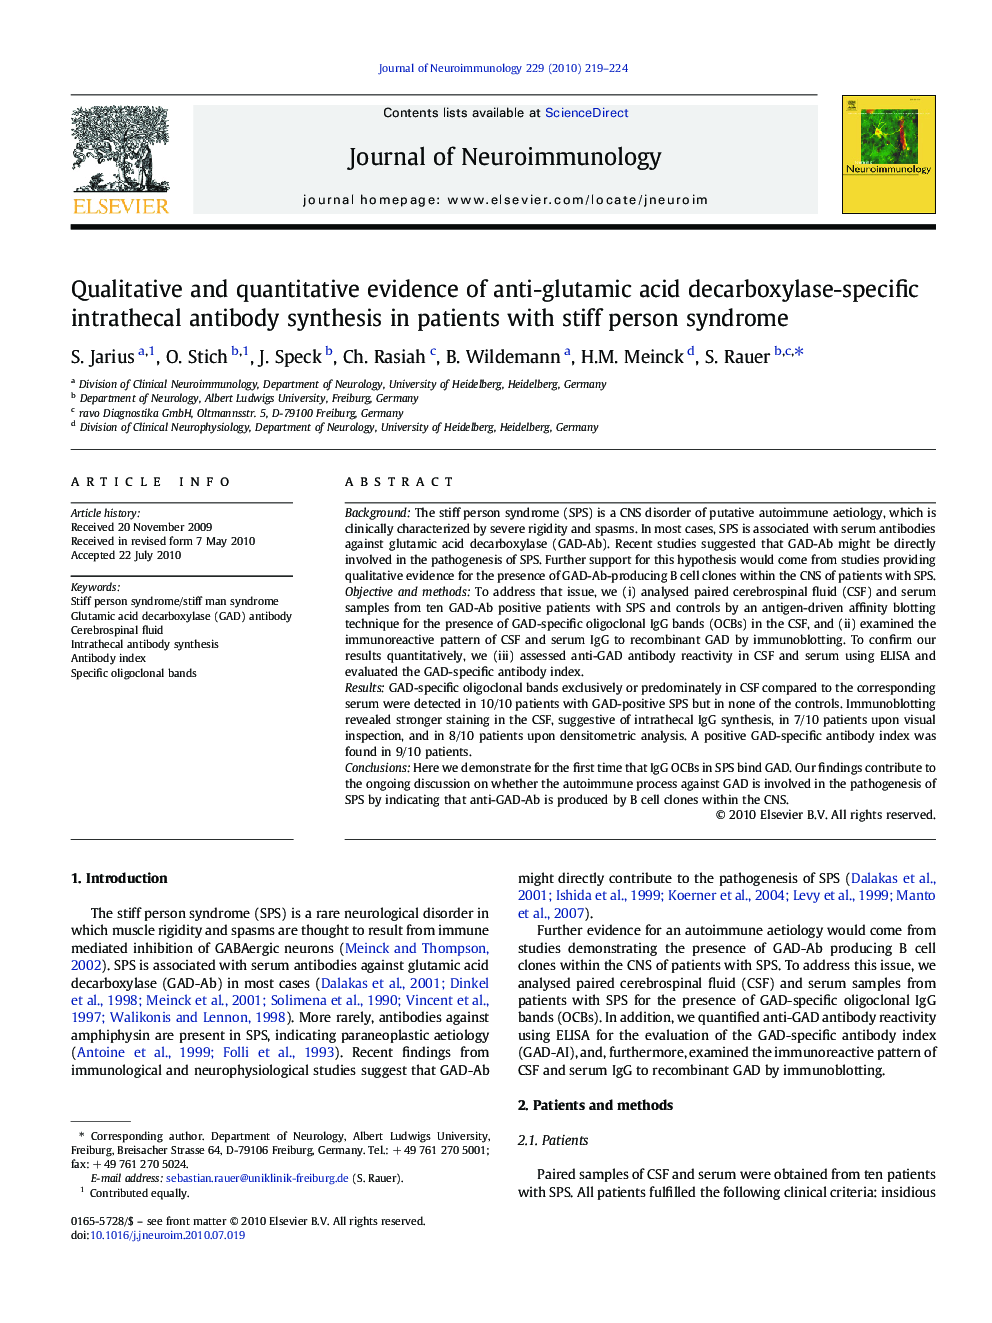 Qualitative and quantitative evidence of anti-glutamic acid decarboxylase-specific intrathecal antibody synthesis in patients with stiff person syndrome